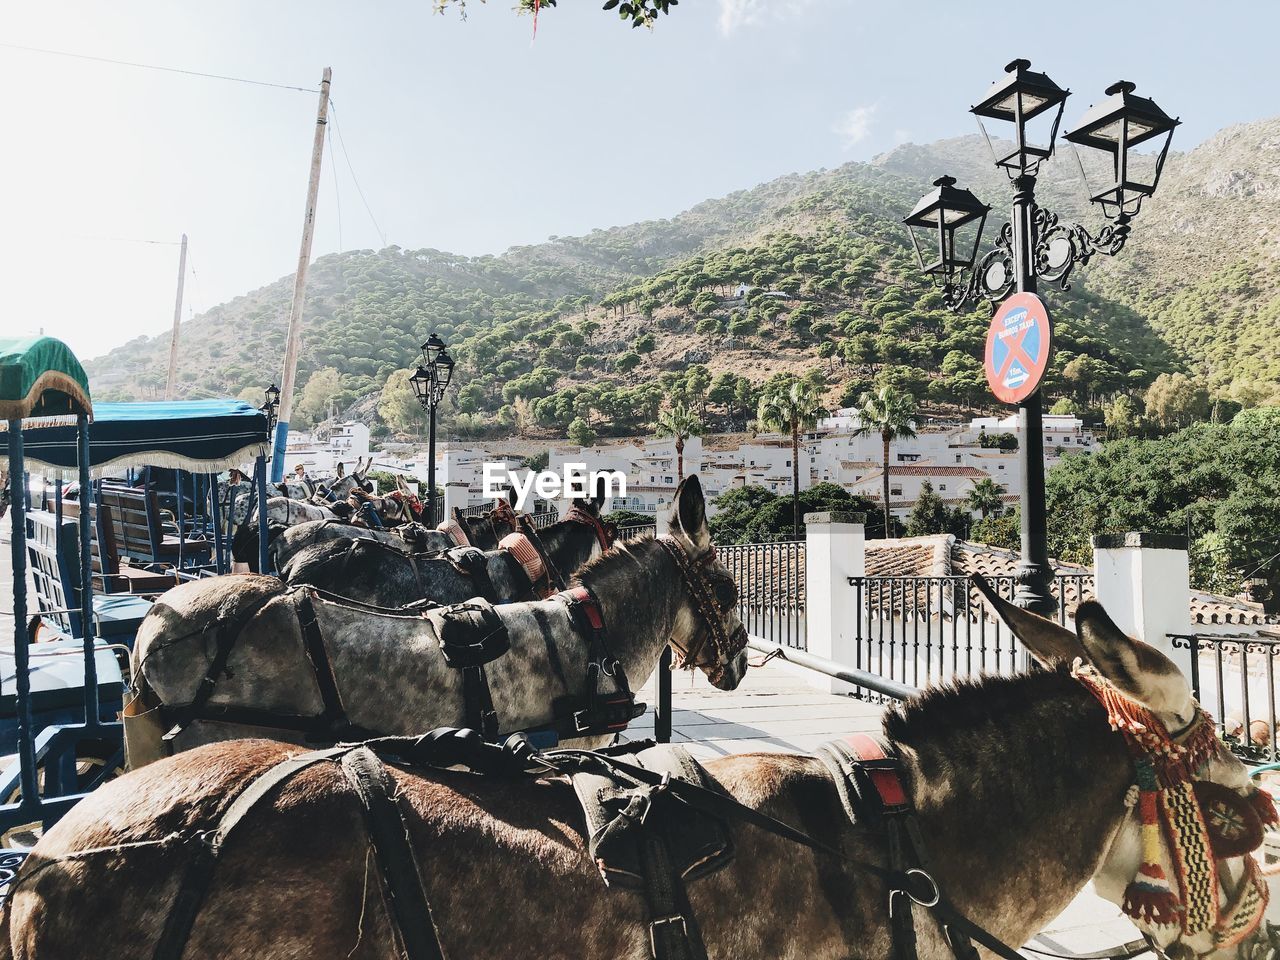 Panoramic view of donkeys on street against sky